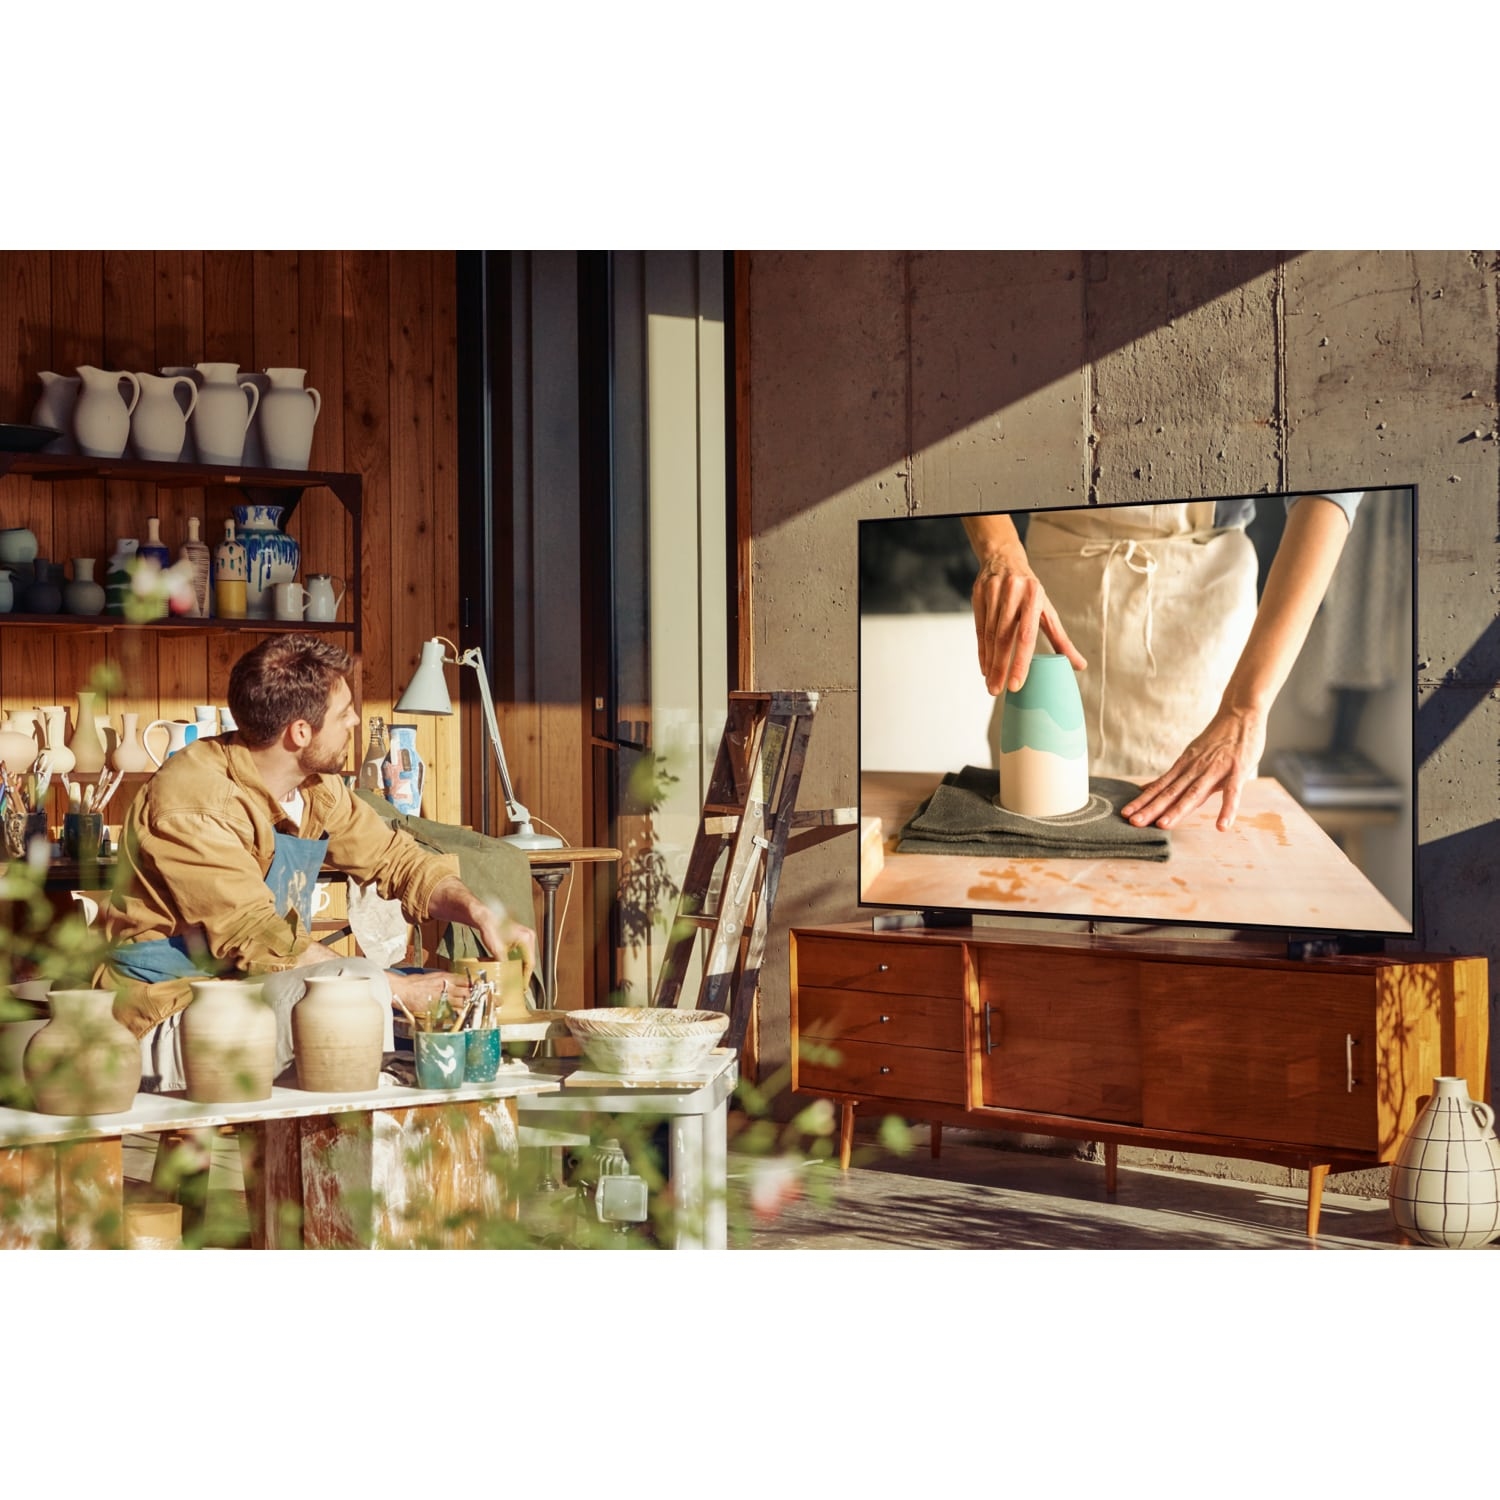 Samsung UE43AU8000KXXU 43" 4K UHD HDR Smart TV HDR10+ with Dynamic Crystal Colour and Air Slim Design: One Only - 3